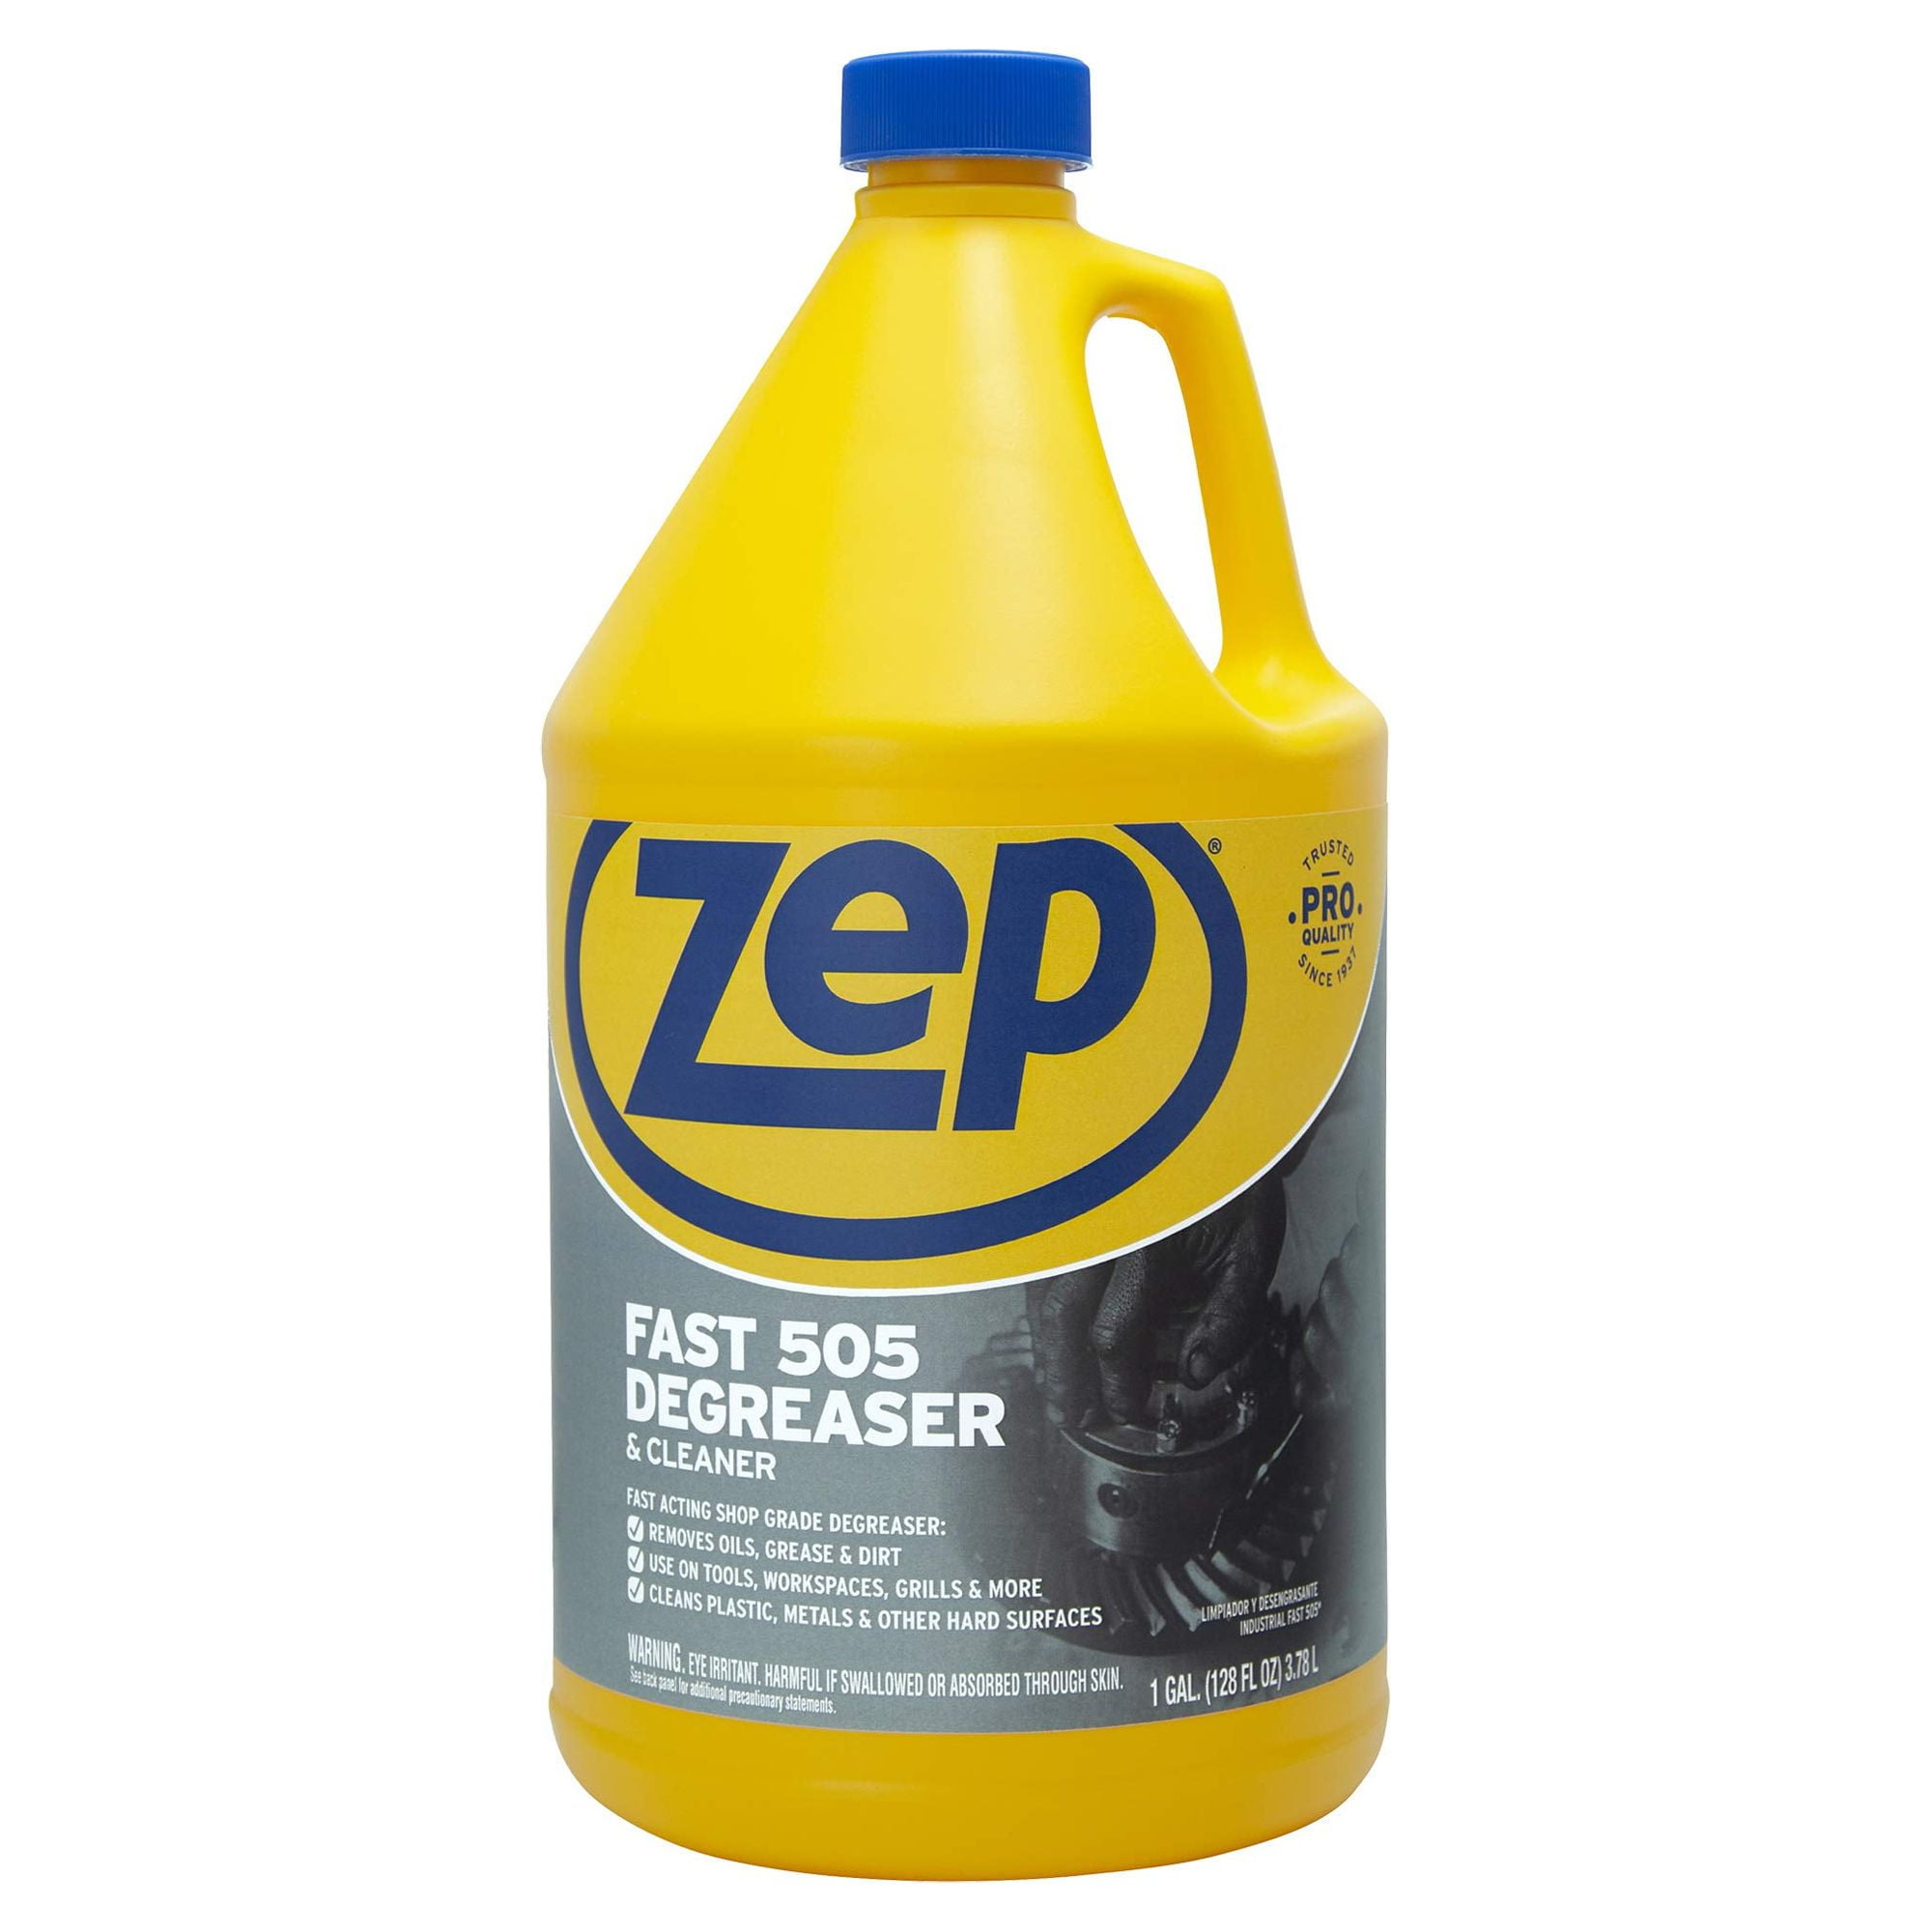  Zep Foaming Wall Cleaner - 18 Ounce (Case of 2) ZUFWC18 -  Removes Stains Without Damaging Finishes : Health & Household